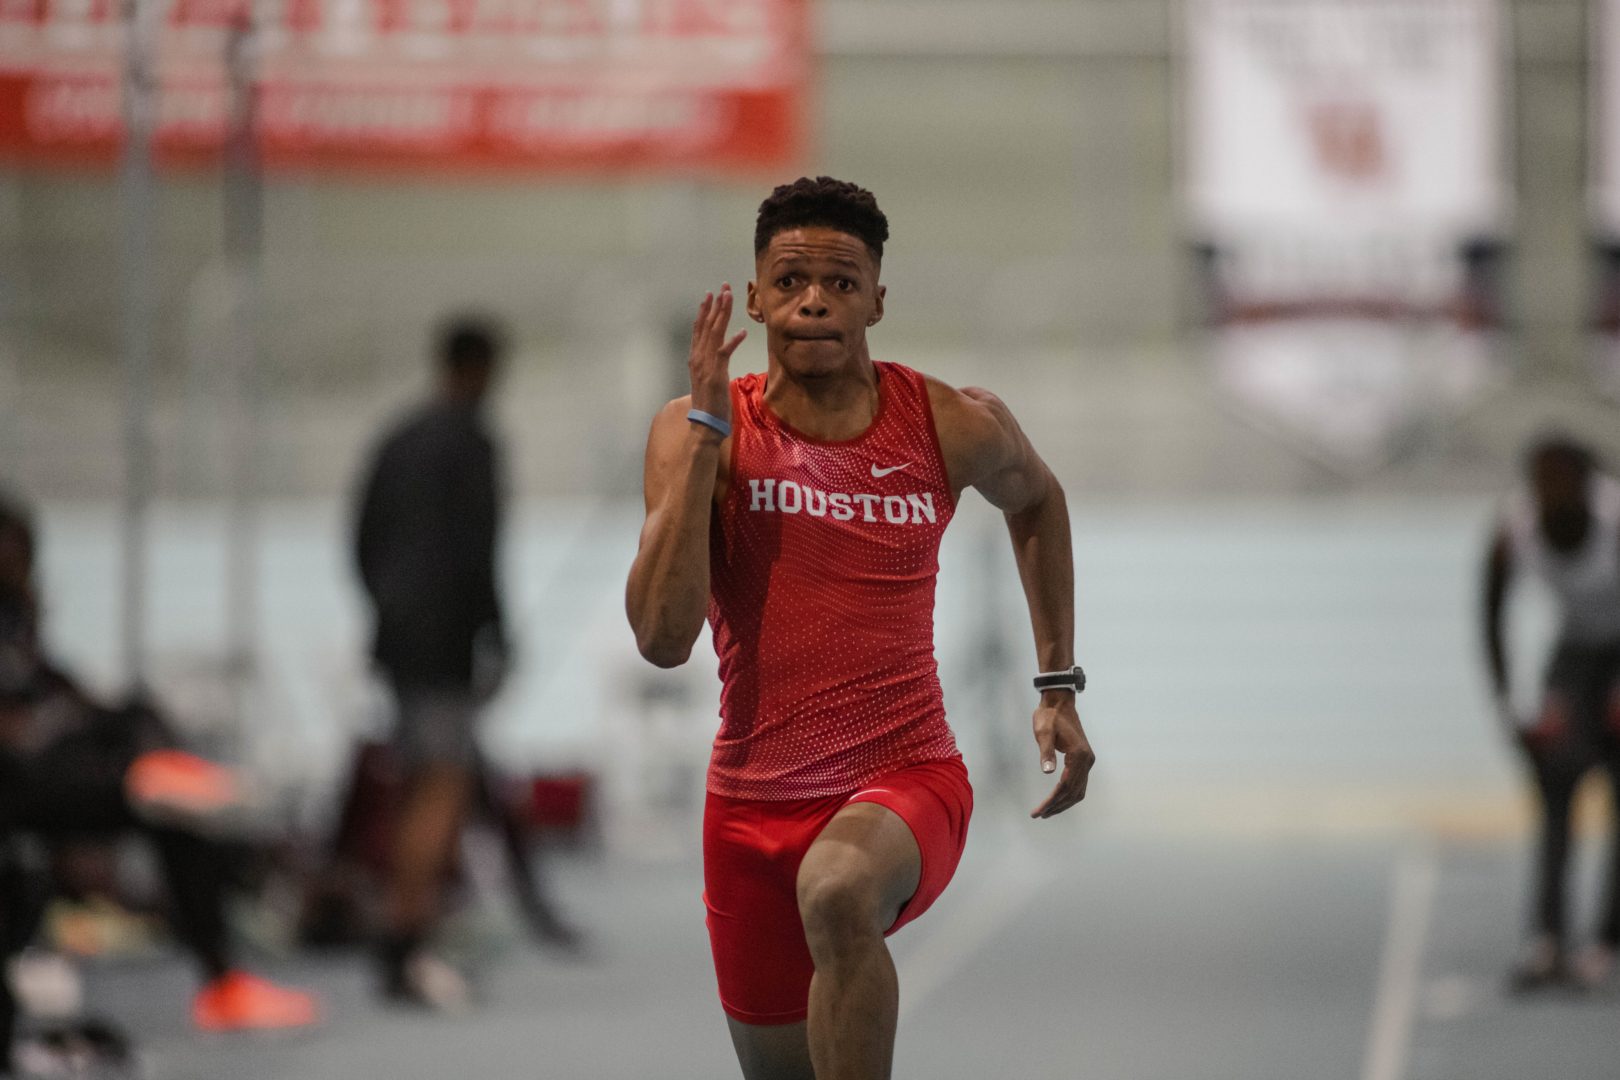 UH track and field sophomore Shaun Maswanganyi recorded a 6.64 time in the 60 meters to earn second place at the Howie Ryan Invitational on Friday. | James Schillinger/The Cougar